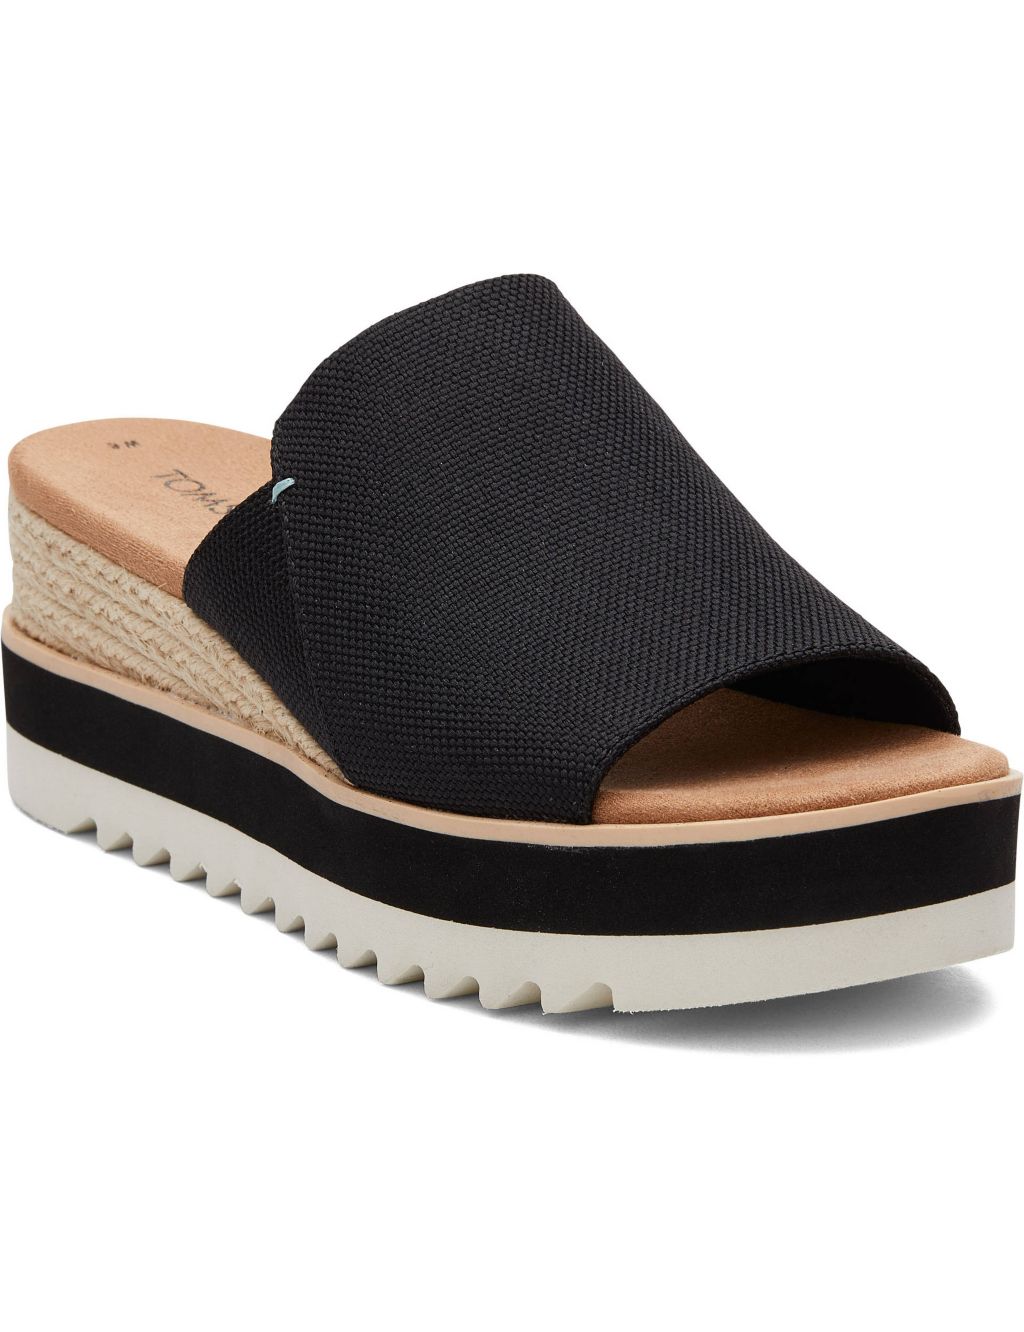 Canvas Wedge Mules image 2